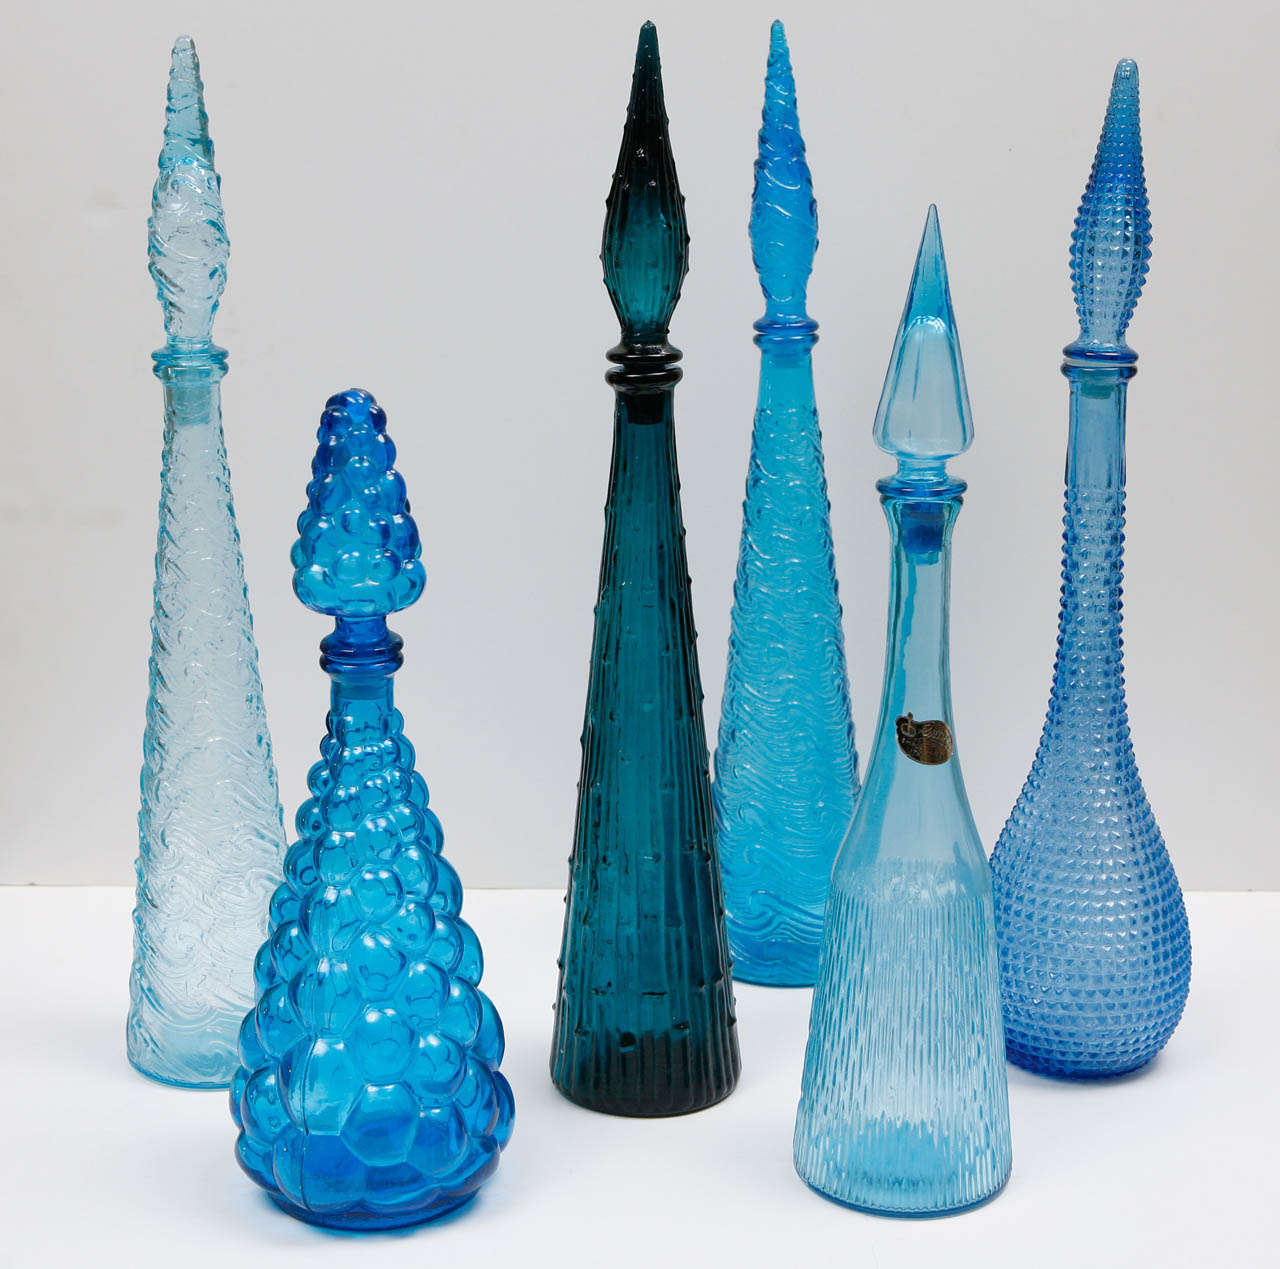 Murano bottles with stoppers that are various shades of blue and heights.